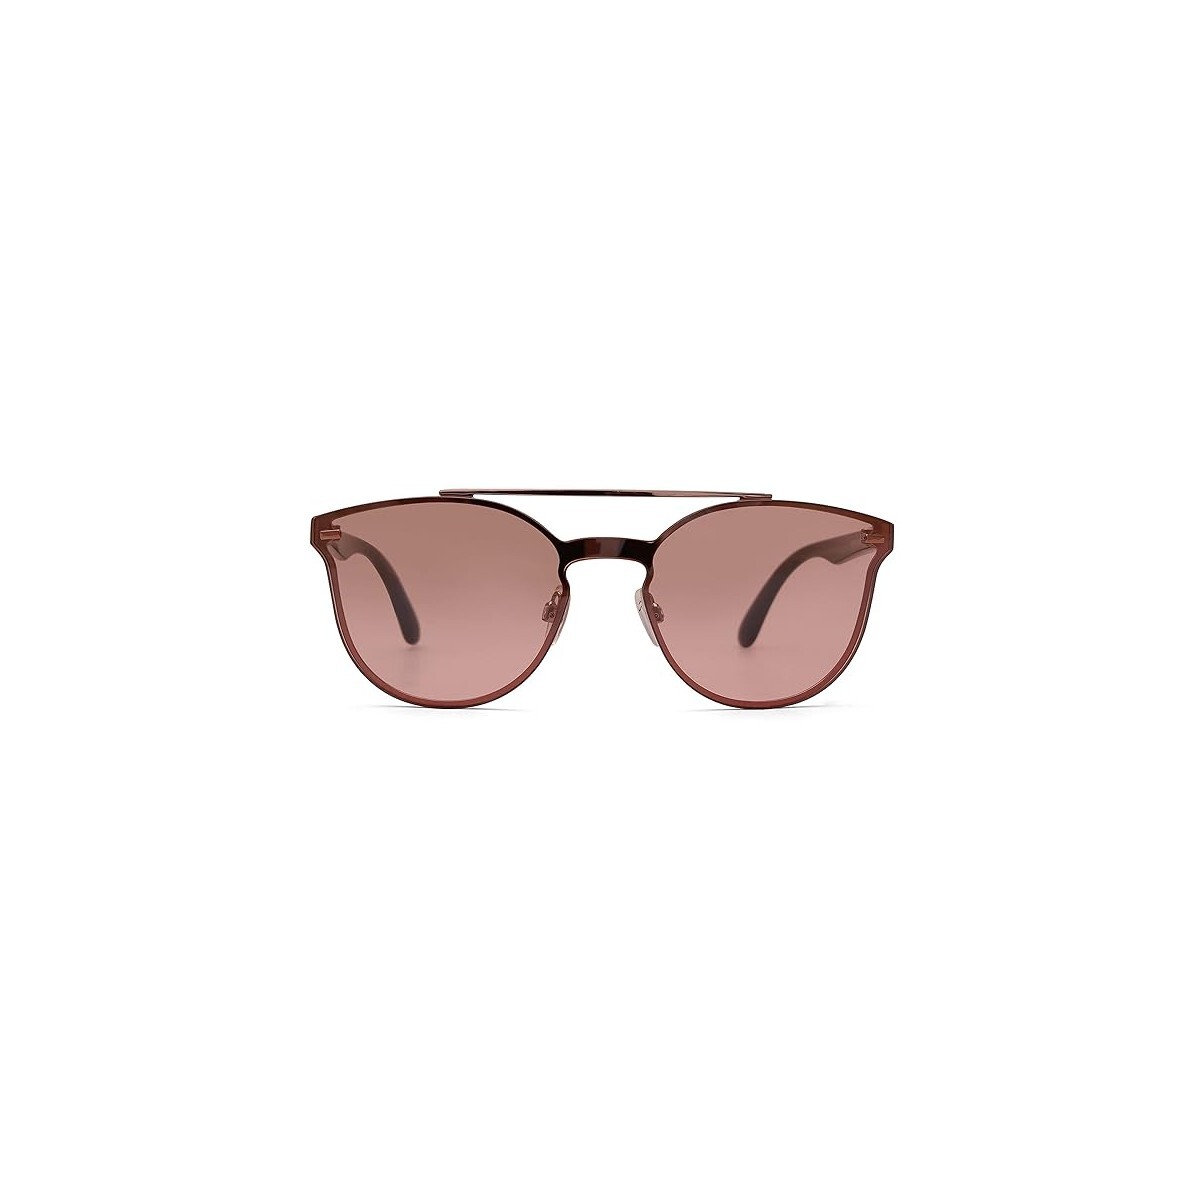 Scott Female Brown With Brown Lens Sunglass